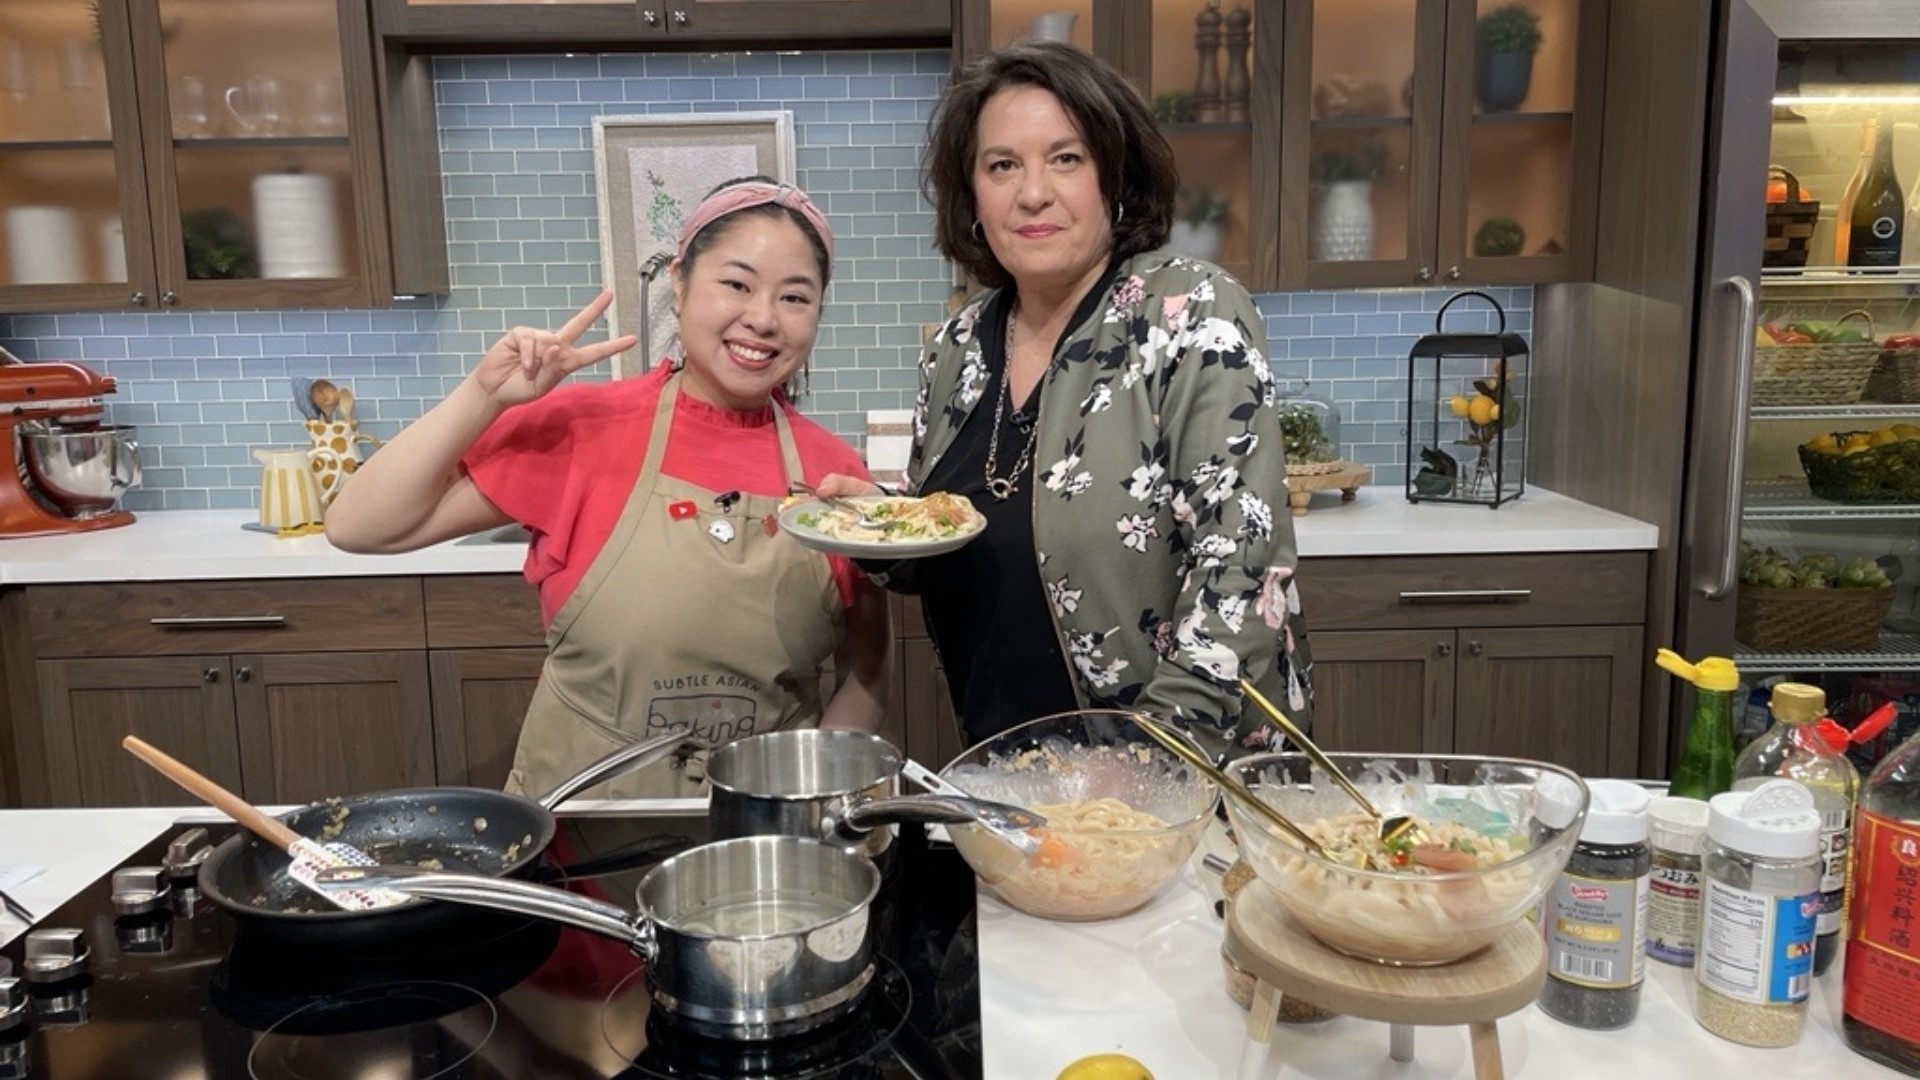 Kat Lieu (Subtle Asian Baking), author of "Modern Asian Baking at Home," joined the show to share a recipe from her upcoming savory cookbook. #newdaynw